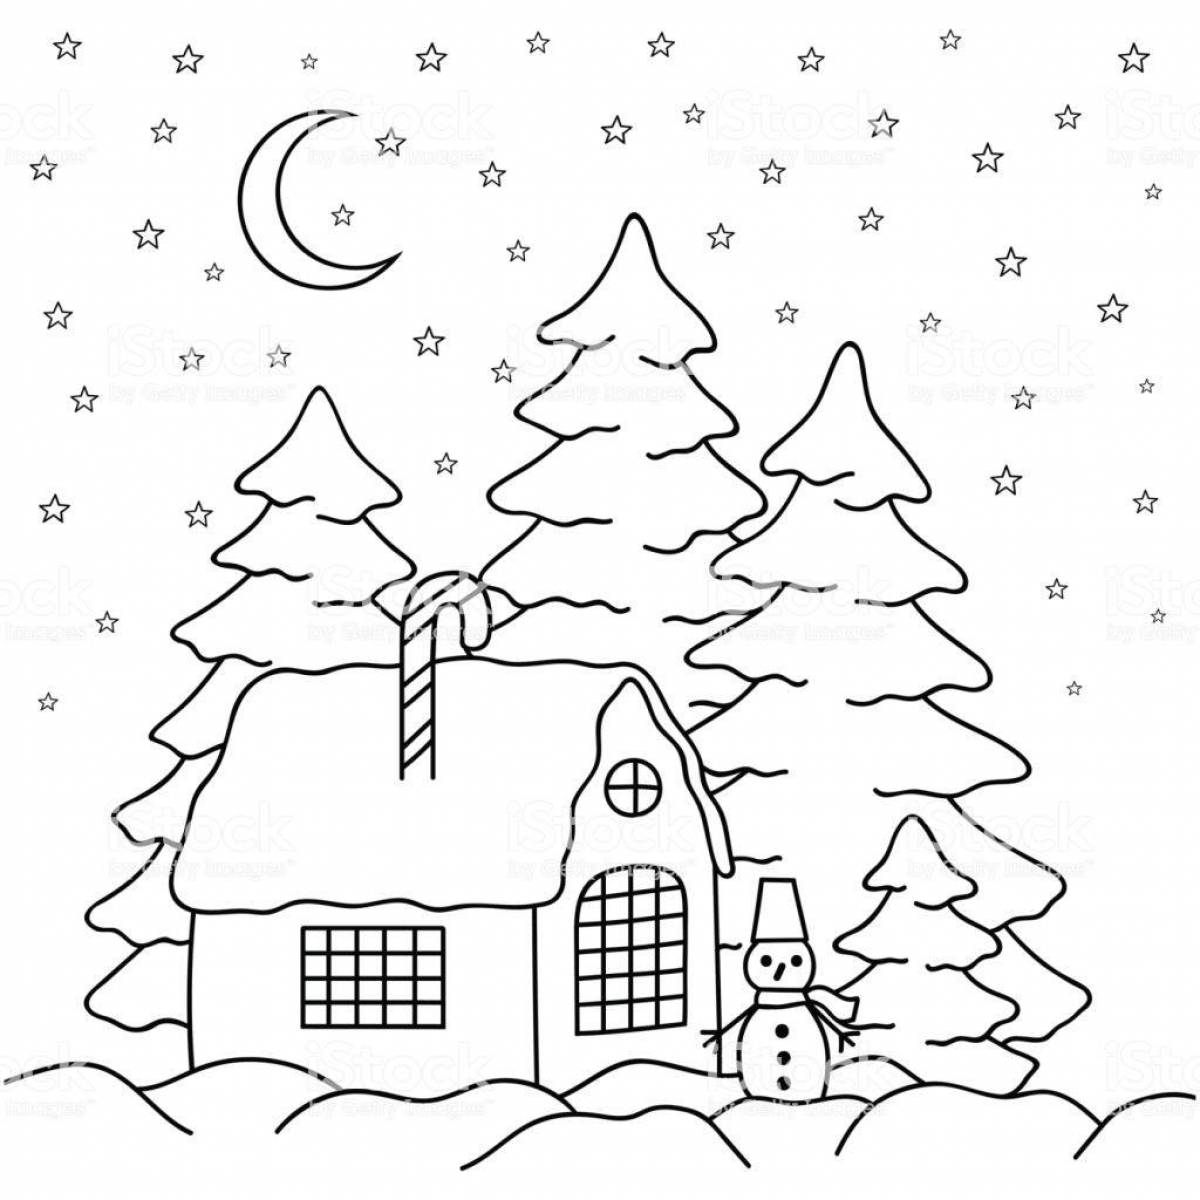 Glittering winter landscape coloring pages for kids